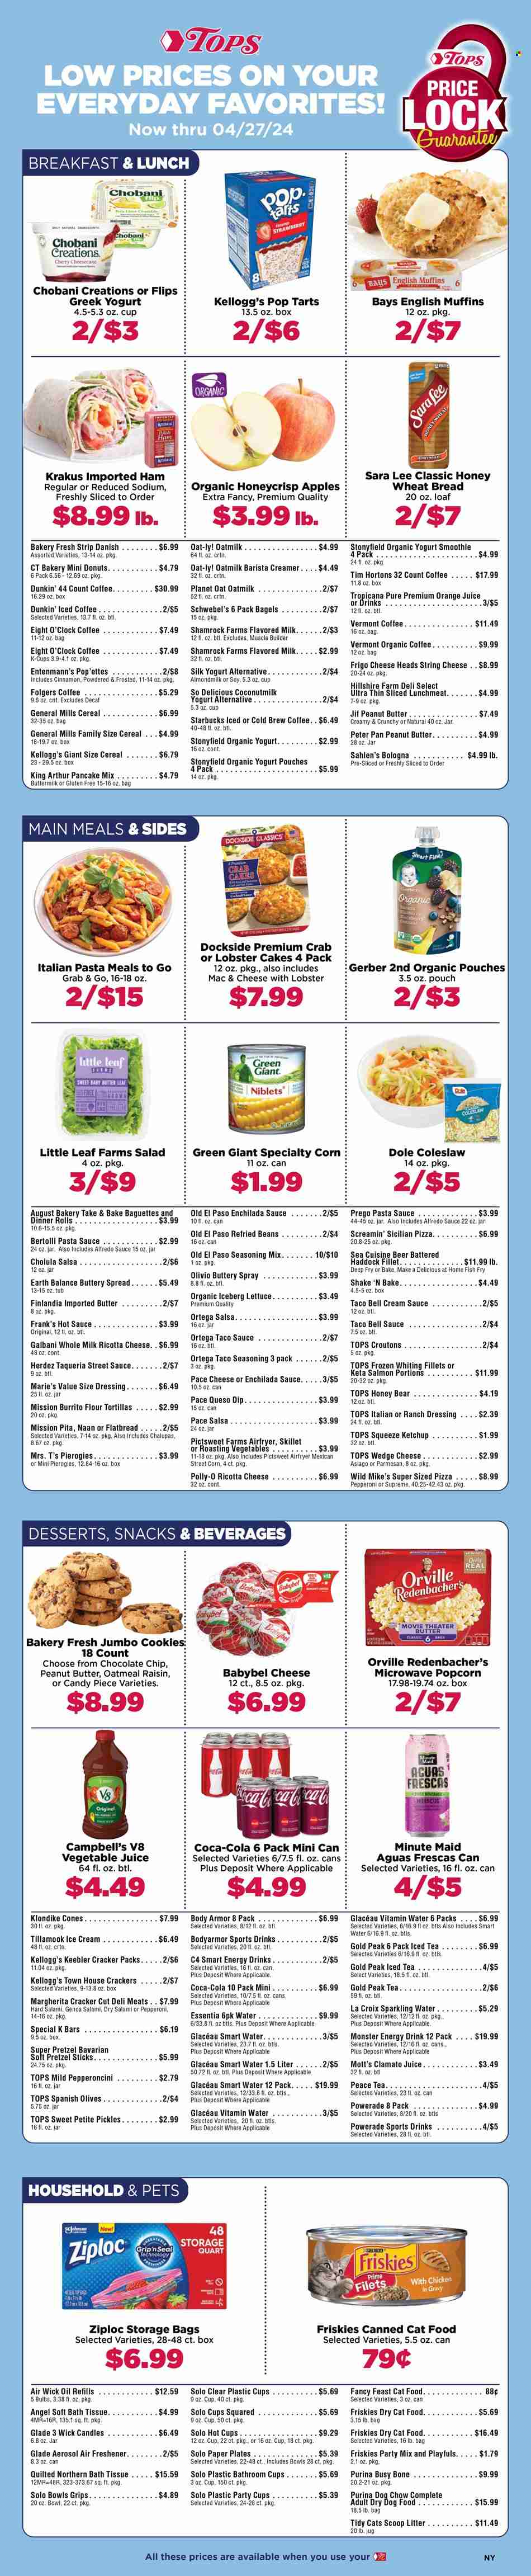 thumbnail - Tops Flyer - 03/03/2024 - 04/27/2024 - Sales products - bagels, baguette, bread, english muffins, tortillas, wheat bread, pita, pretzels, dinner rolls, Old El Paso, Sara Lee, flour tortillas, indian bread, donut, Entenmann's, dessert, pancake mix, coleslaw, lettuce, salad, Dole, apples, Mott's, fish fillets, haddock, whiting fillets, whiting, Campbell's, crab cake, lobster cakes, macaroni & cheese, pizza, pasta sauce, snack, Alfredo sauce, Bertolli, spaghetti sauce, ready meal, Hillshire Farm, bologna sausage, sliced meat, lunch meat, asiago, ricotta, string cheese, cheese, Galbani, Babybel, greek yoghurt, organic yoghurt, Silk, Chobani, snack bar, almond milk, buttermilk, flavoured milk, oat milk, plant-based milk, buttery spread, creamer, dip, ice cream, ice cones, Screamin' Sicilian, Kellogg's, Pop-Tarts, Keebler, General Mills, breakfast bar, Gerber, popcorn, salty snack, croutons, oatmeal, coconut milk, enchilada sauce, refried beans, pickles, olives, pickled vegetables, taco sauce, hot sauce, ketchup, salsa, Jif, Coca-Cola, tomato juice, Powerade, orange juice, Body Armor, energy drink, fruit drink, ice tea, Clamato, soft drink, Monster Energy, Gold Peak Tea, vegetable juice, electrolyte drink, smoothie, sparkling water, Smartwater, vitamin water, water, iced coffee, carbonated soft drink, coffee drink, Starbucks, Folgers, organic coffee, coffee capsules, K-Cups, Eight O'Clock, bath tissue, Quilted Northern, Ziploc, storage bag, candle, air freshener, Air Wick, Glade, paper plate, party cups, plastic cup, bulb, animal food, animal treats, cat food, dog food, Dog Chow, Purina, dry dog food, dry cat food, Fancy Feast, Friskies. Page 1.